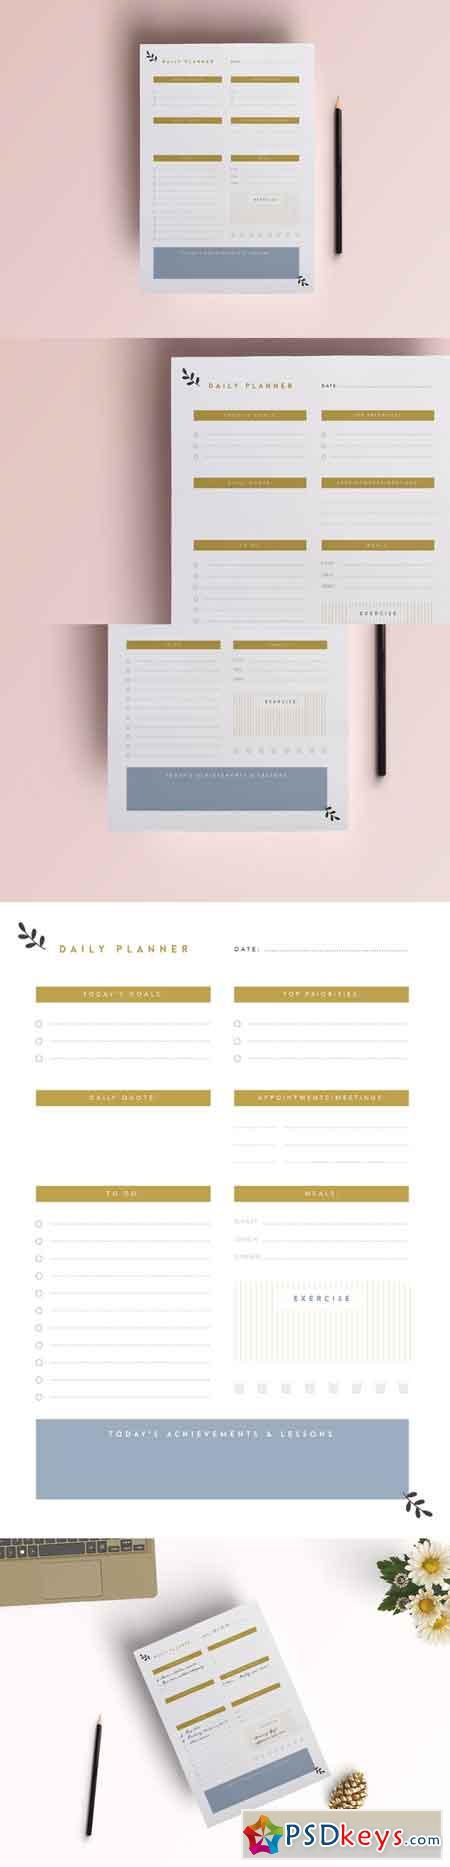 Daily Planner Printable A4 Planner 637886